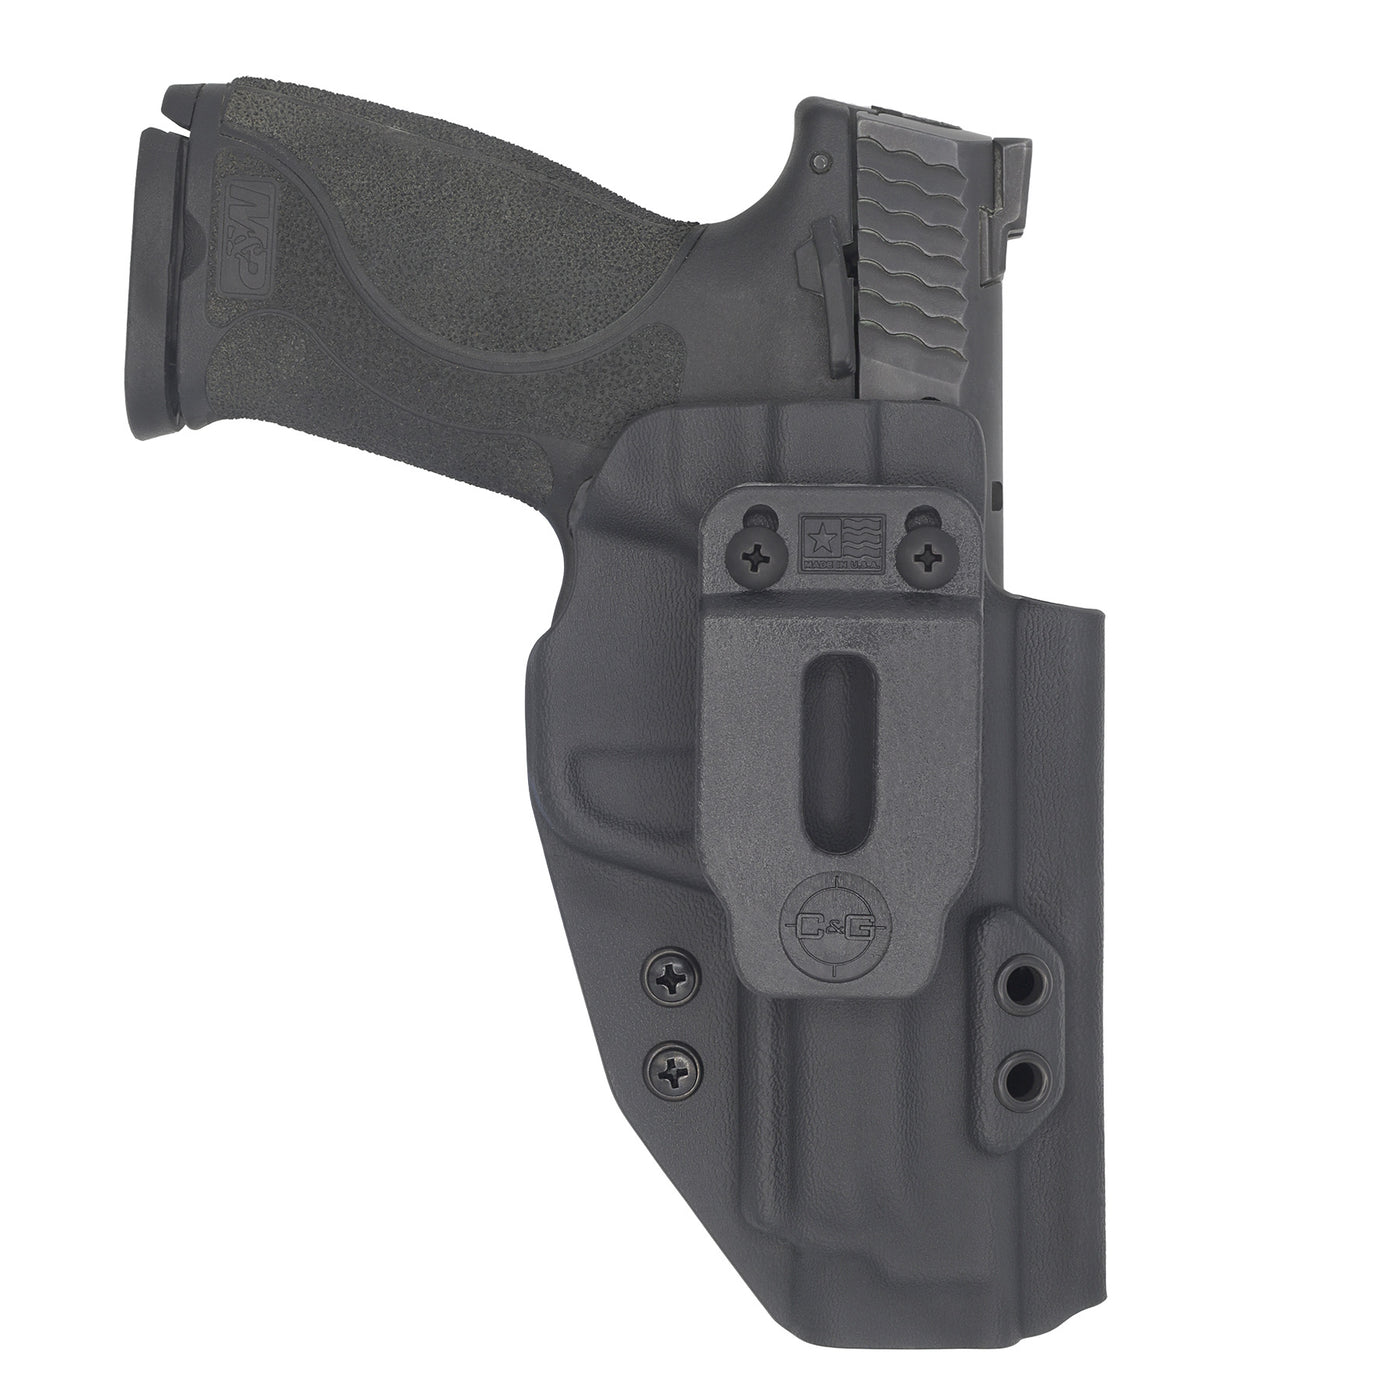 This is the front of the C&G Holsters covert series inside the waistband (IWB) holster for the Smith & Wesson M&P 9/40 4.25" in holstered position